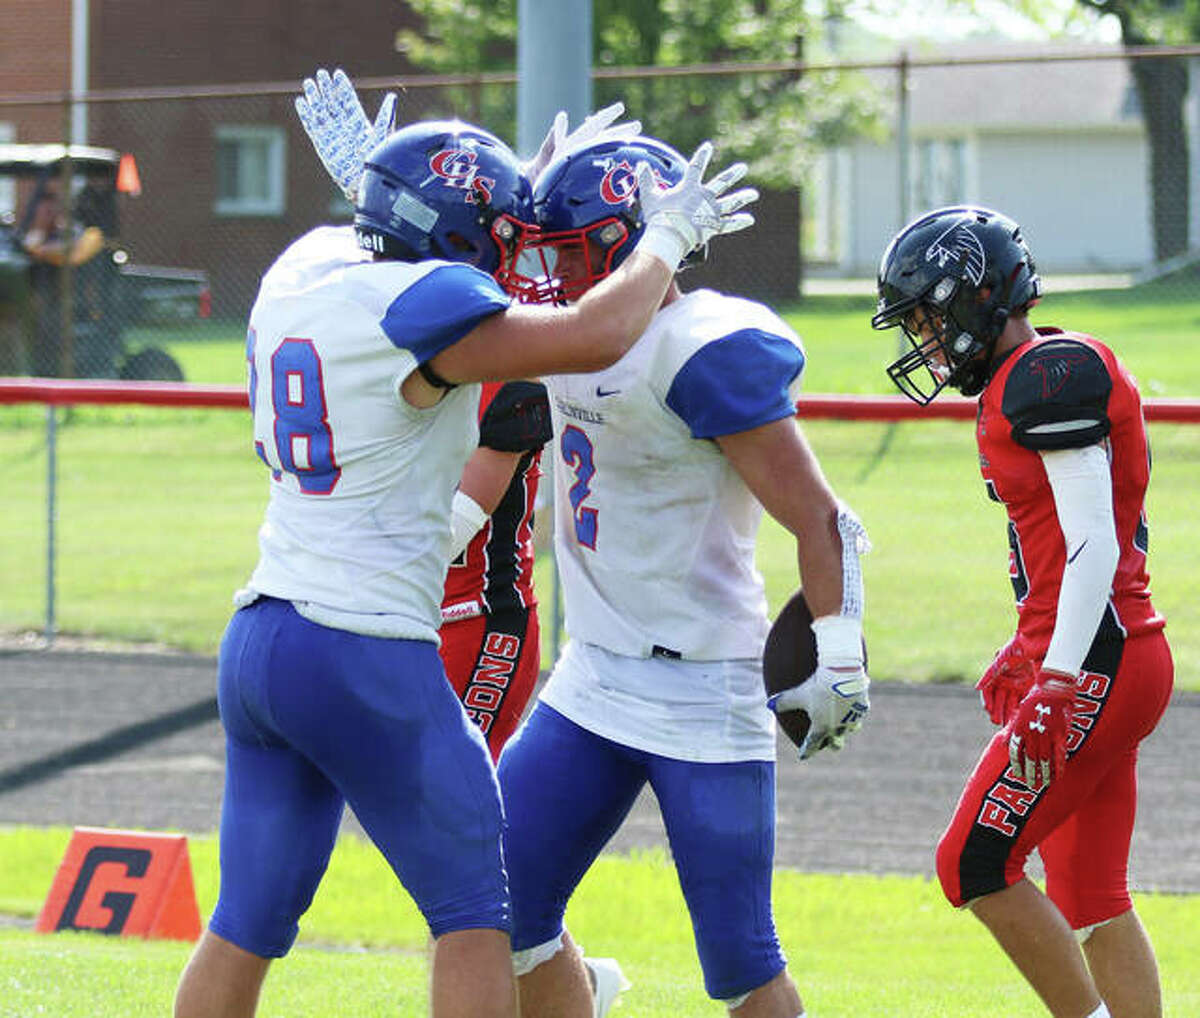 Carlinville’s Carson Wiser (middle) is congratulated by a teammate after making a touchdown catch in a Week 1 win at Gibson City. On Friday, the Cavs were at home and beat Staunton to improve to 4-1.